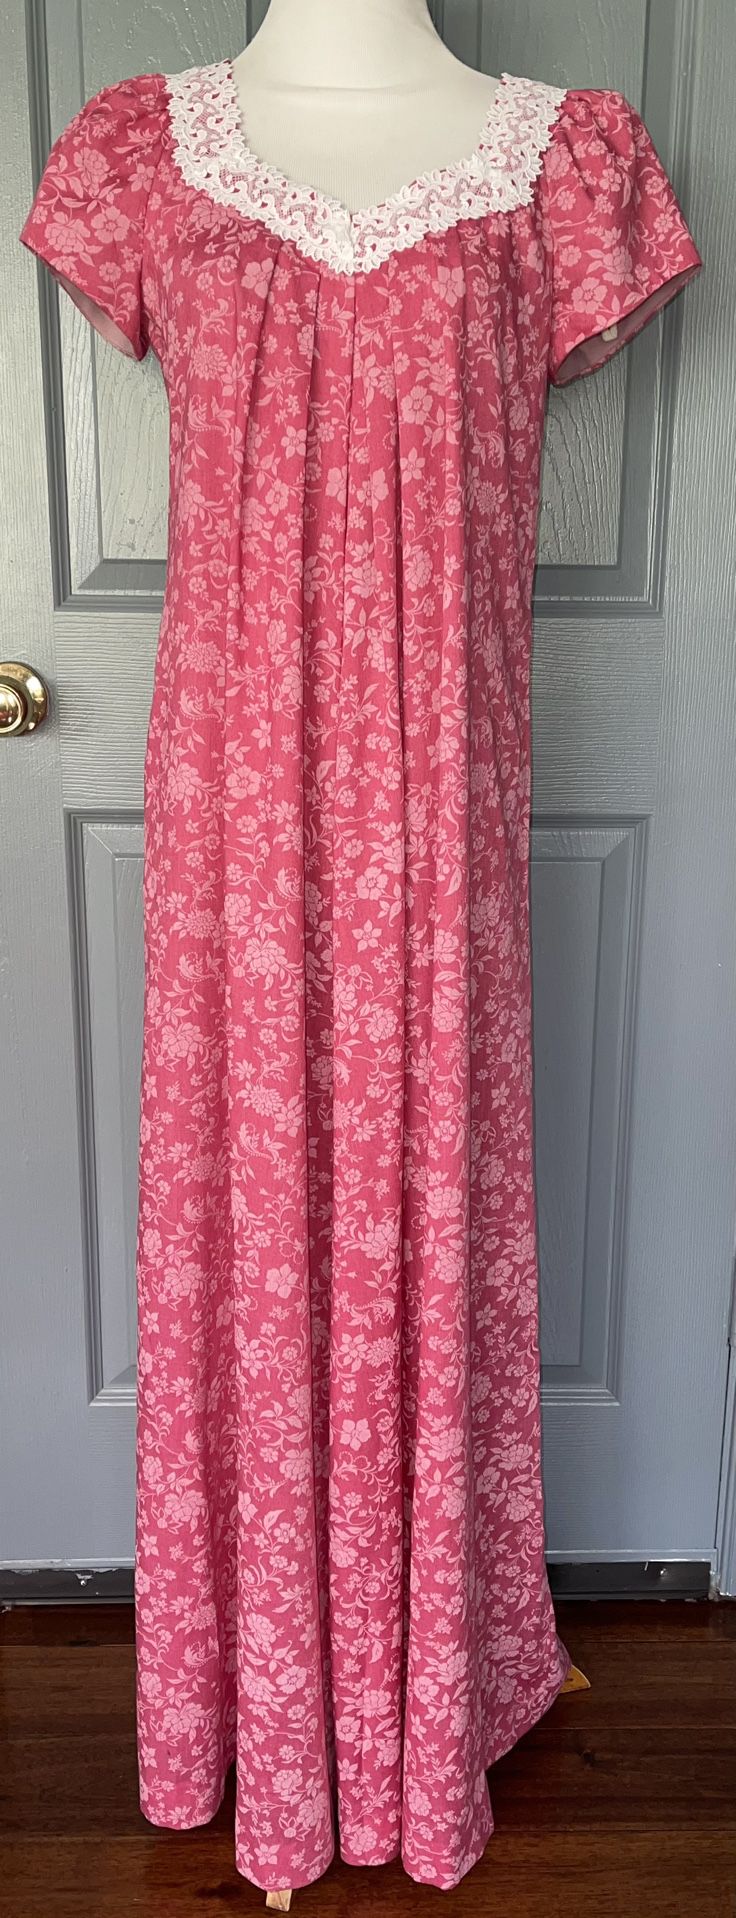 Andrade Hawaii Vintage Women’s Pink Floral Lace Trim Long  Dress. 